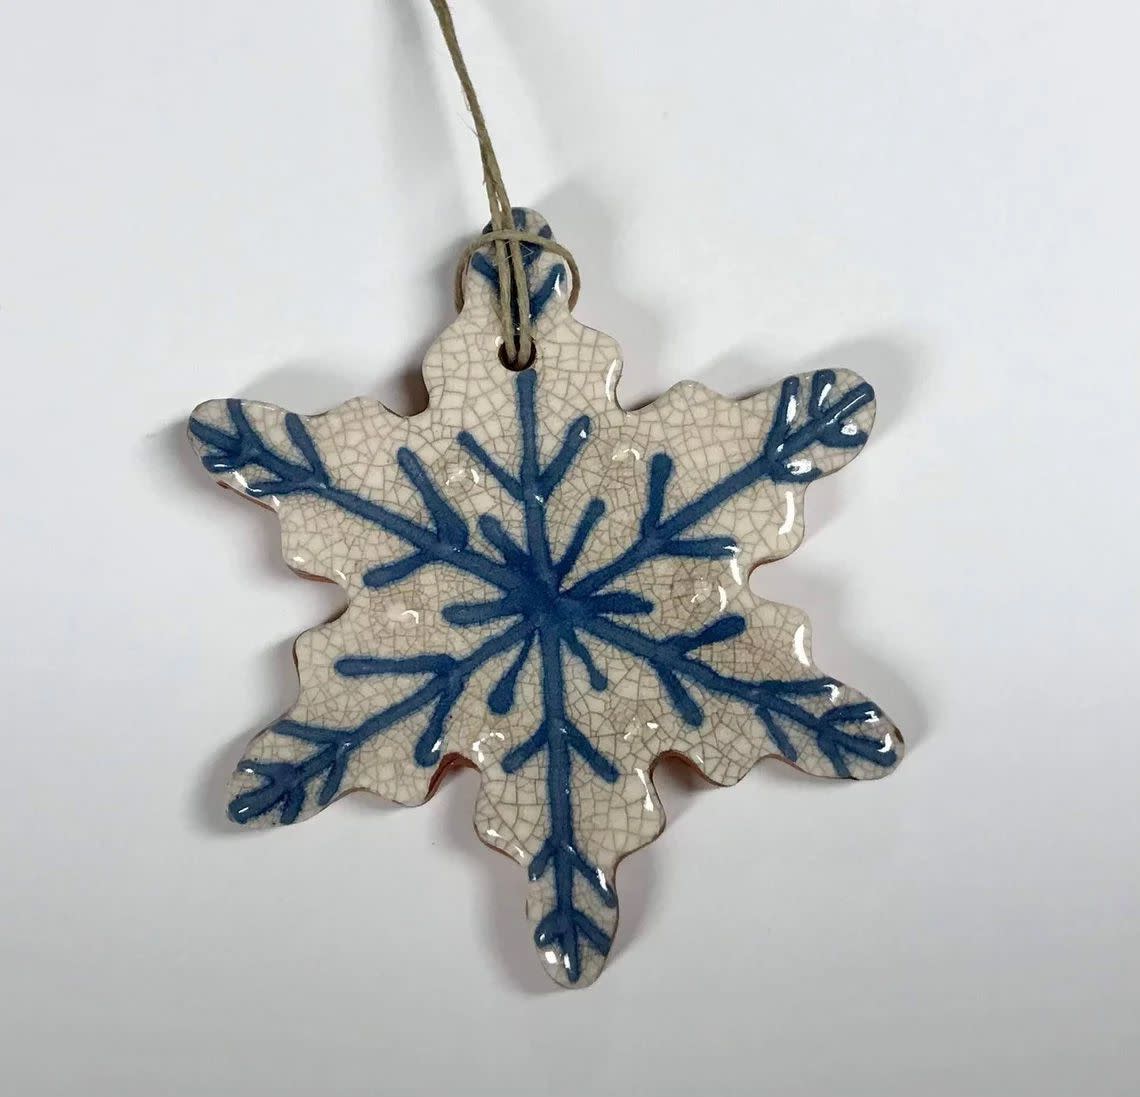 Earthenware Snowflake Ornament with blue designs